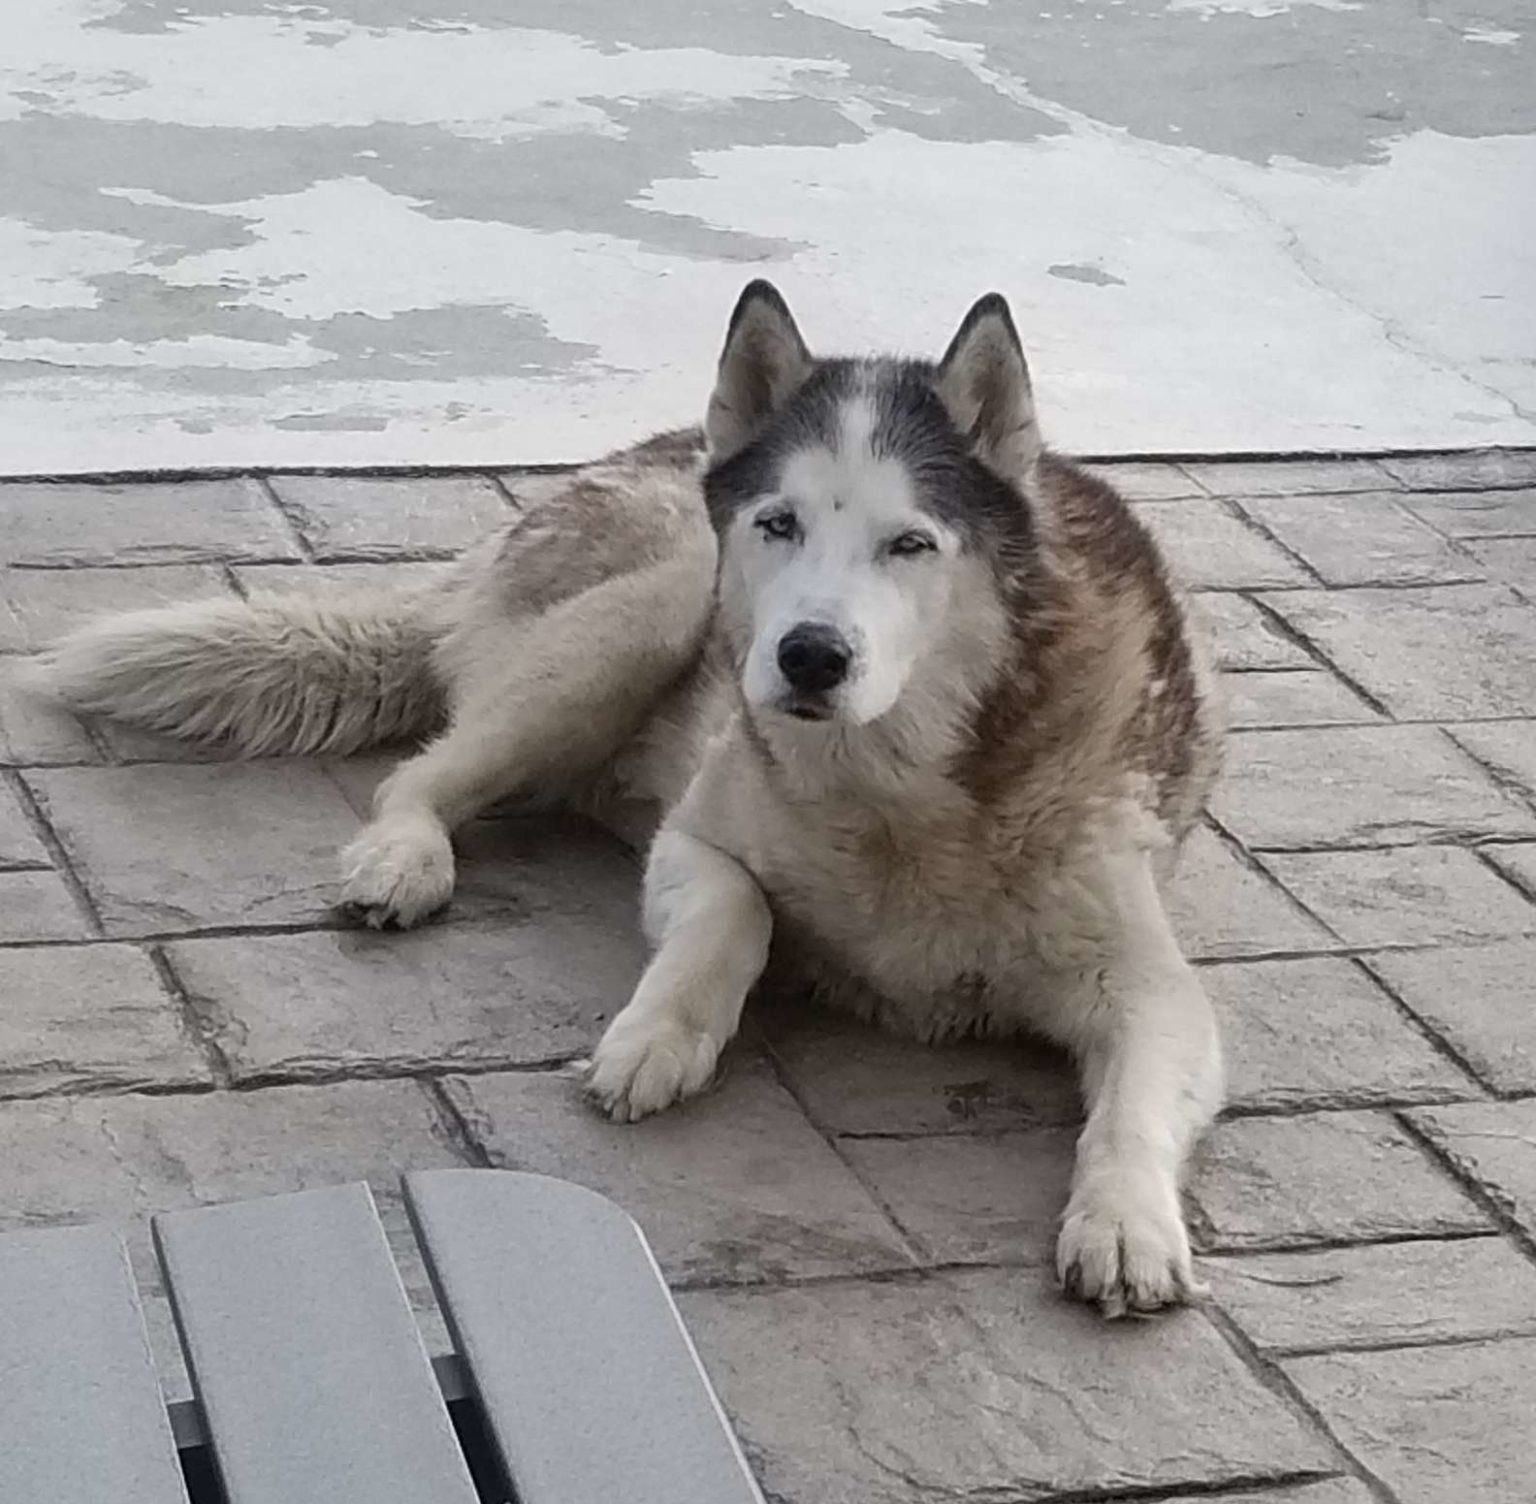 Amazon Delivery Driver Jumps Into Pool To Save Senior Husky Dog From Drowning